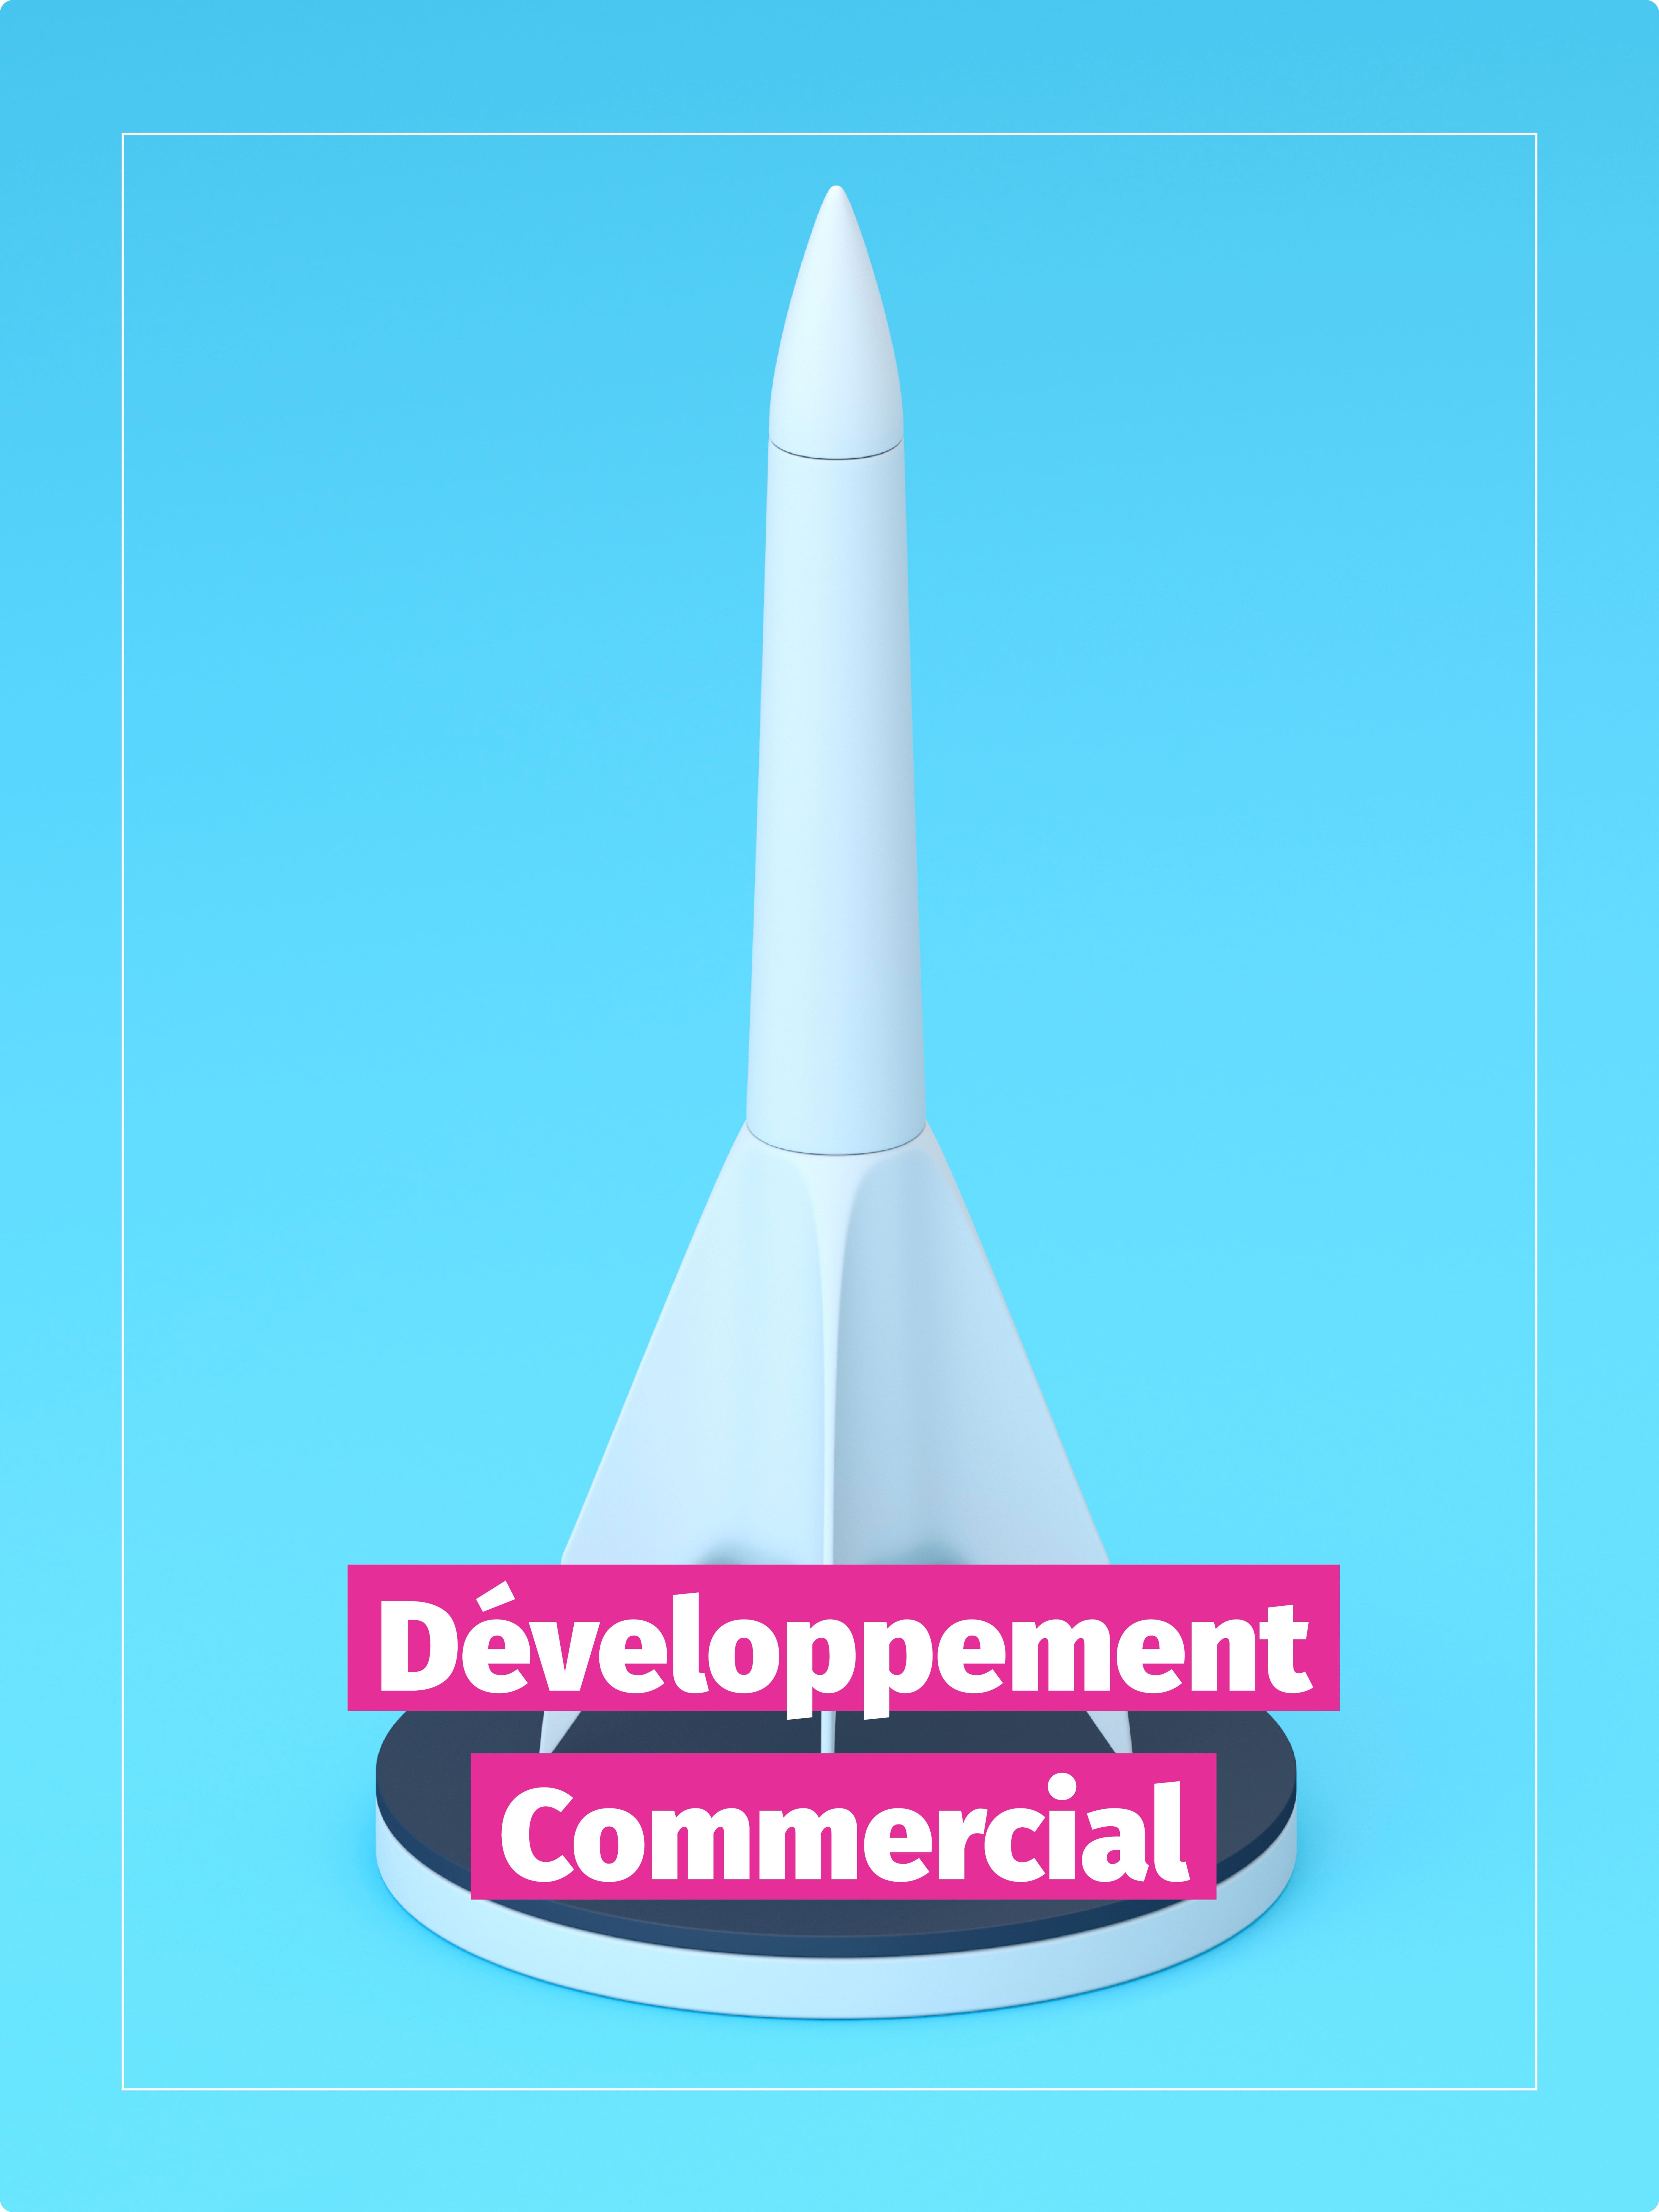 conseil accompagnement developpement commercial